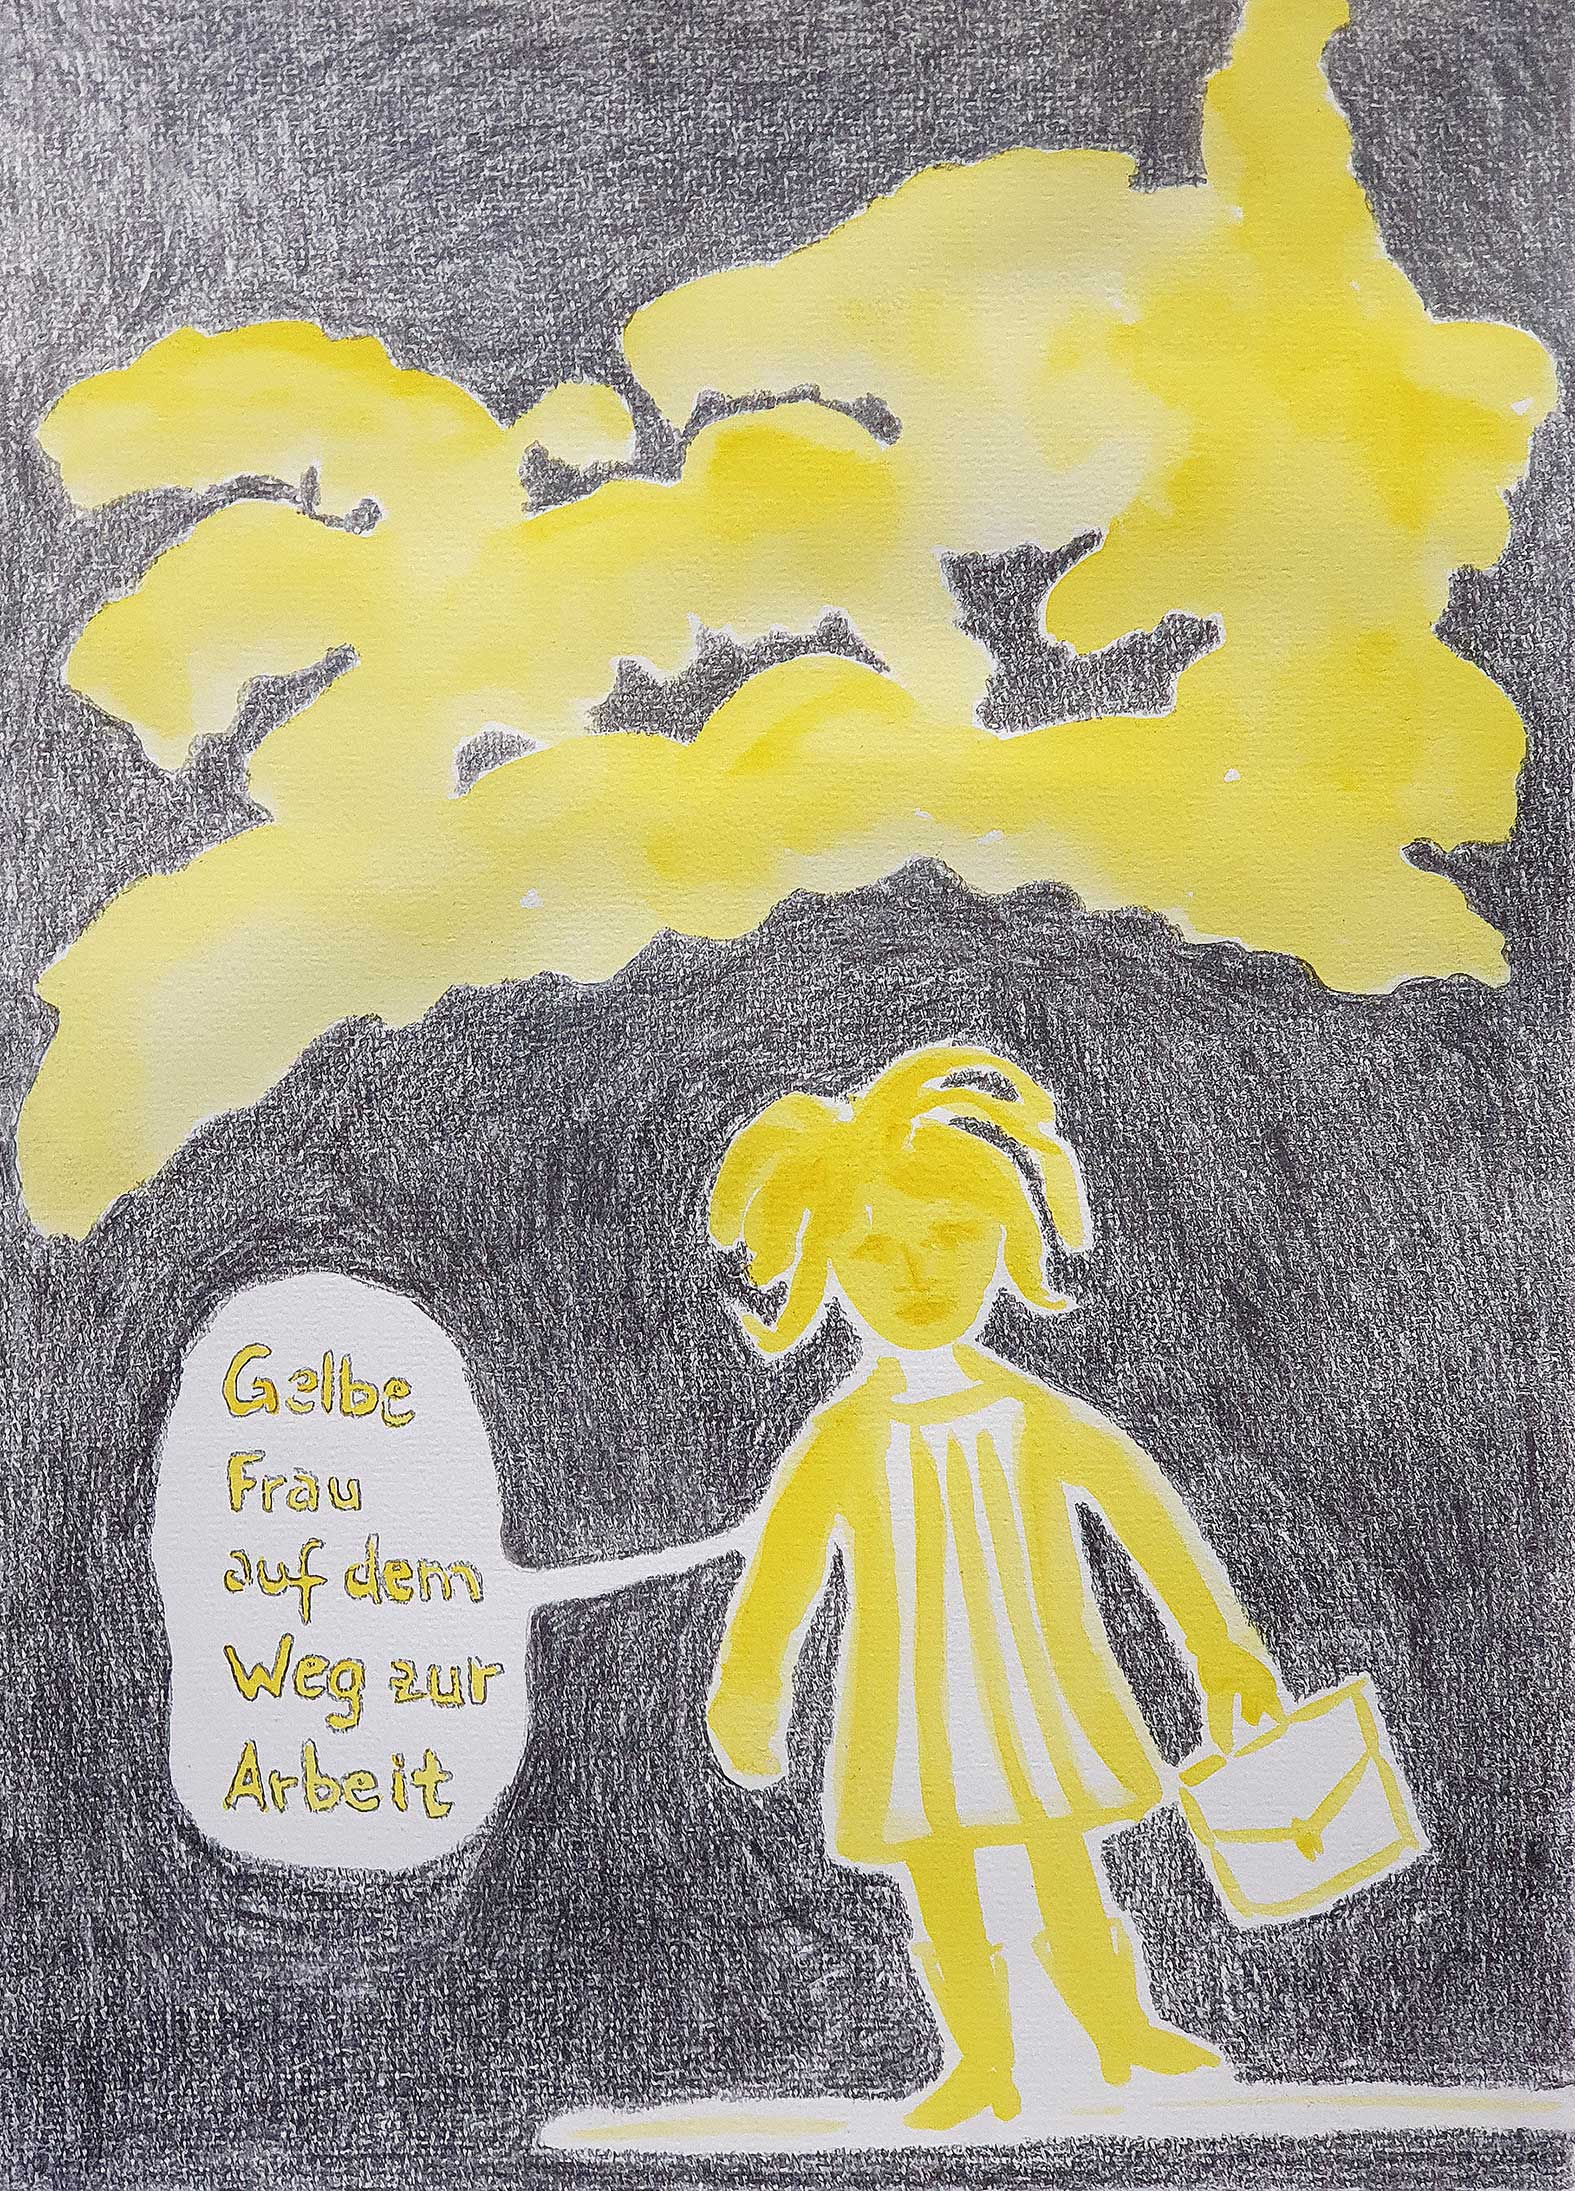 Gelbe Frau drawing text and image Angelika Hasse 2022